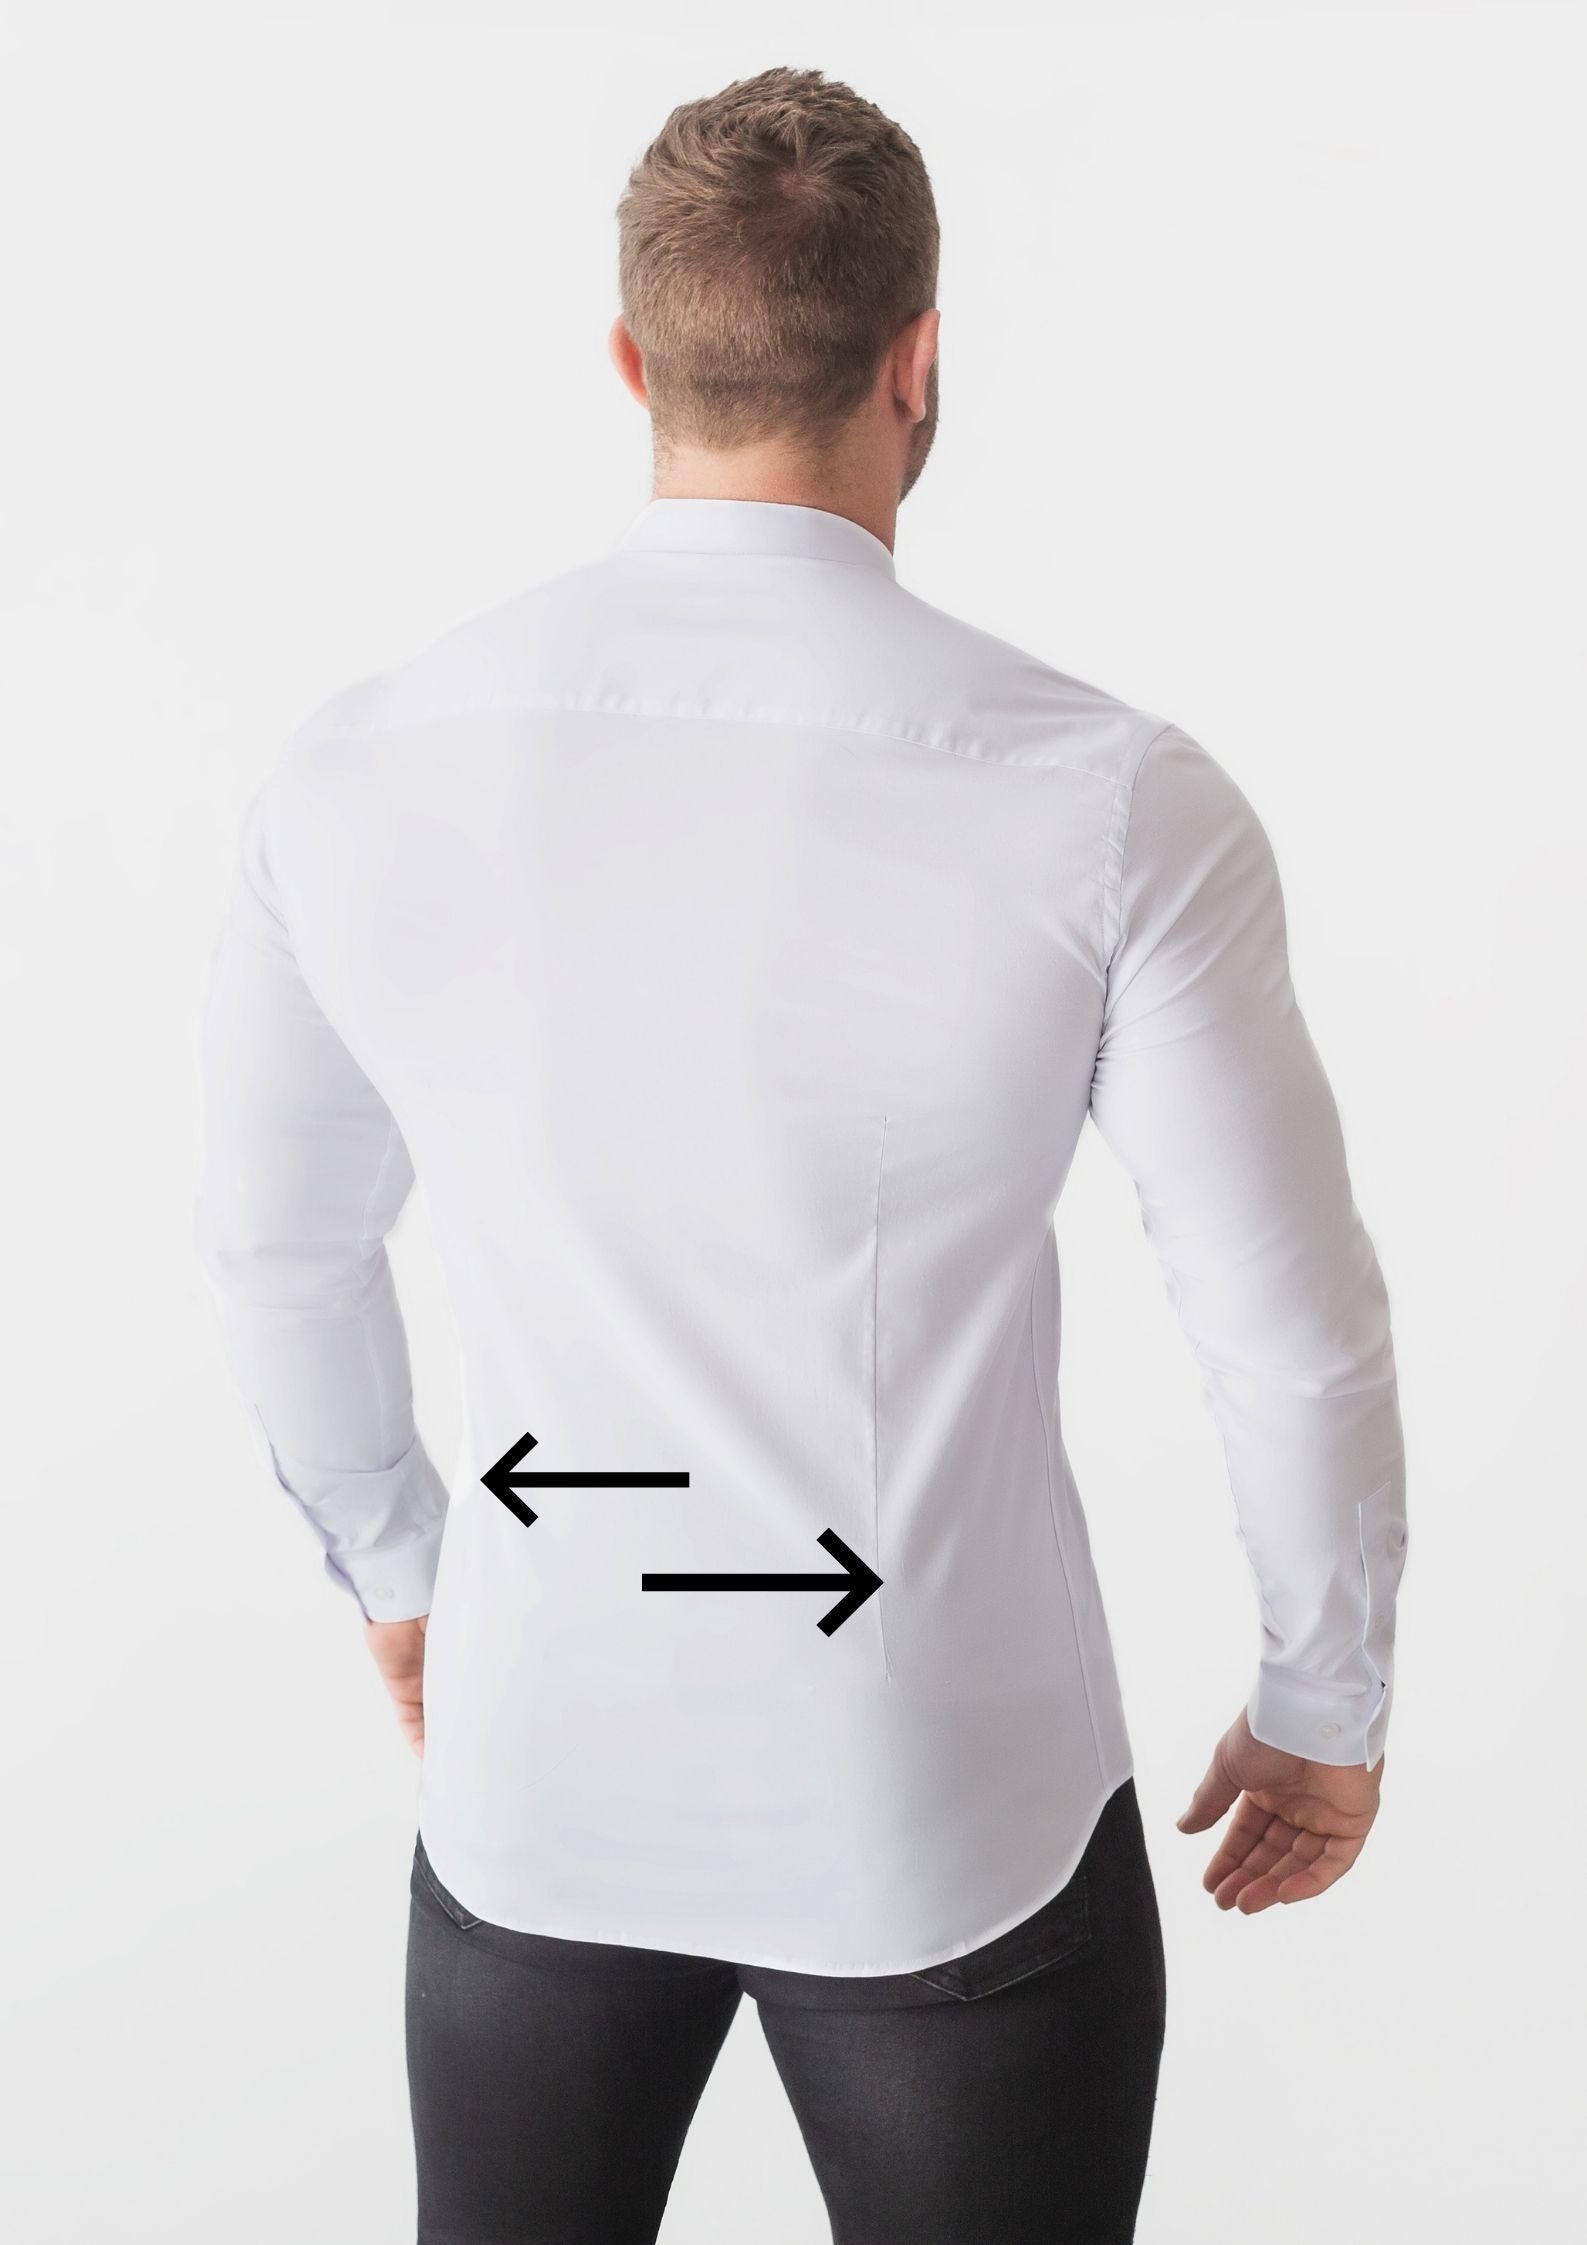 Darting a Shirt by Tapered Menswear. Arrows showing where darts are on the back of a mens dress shirt